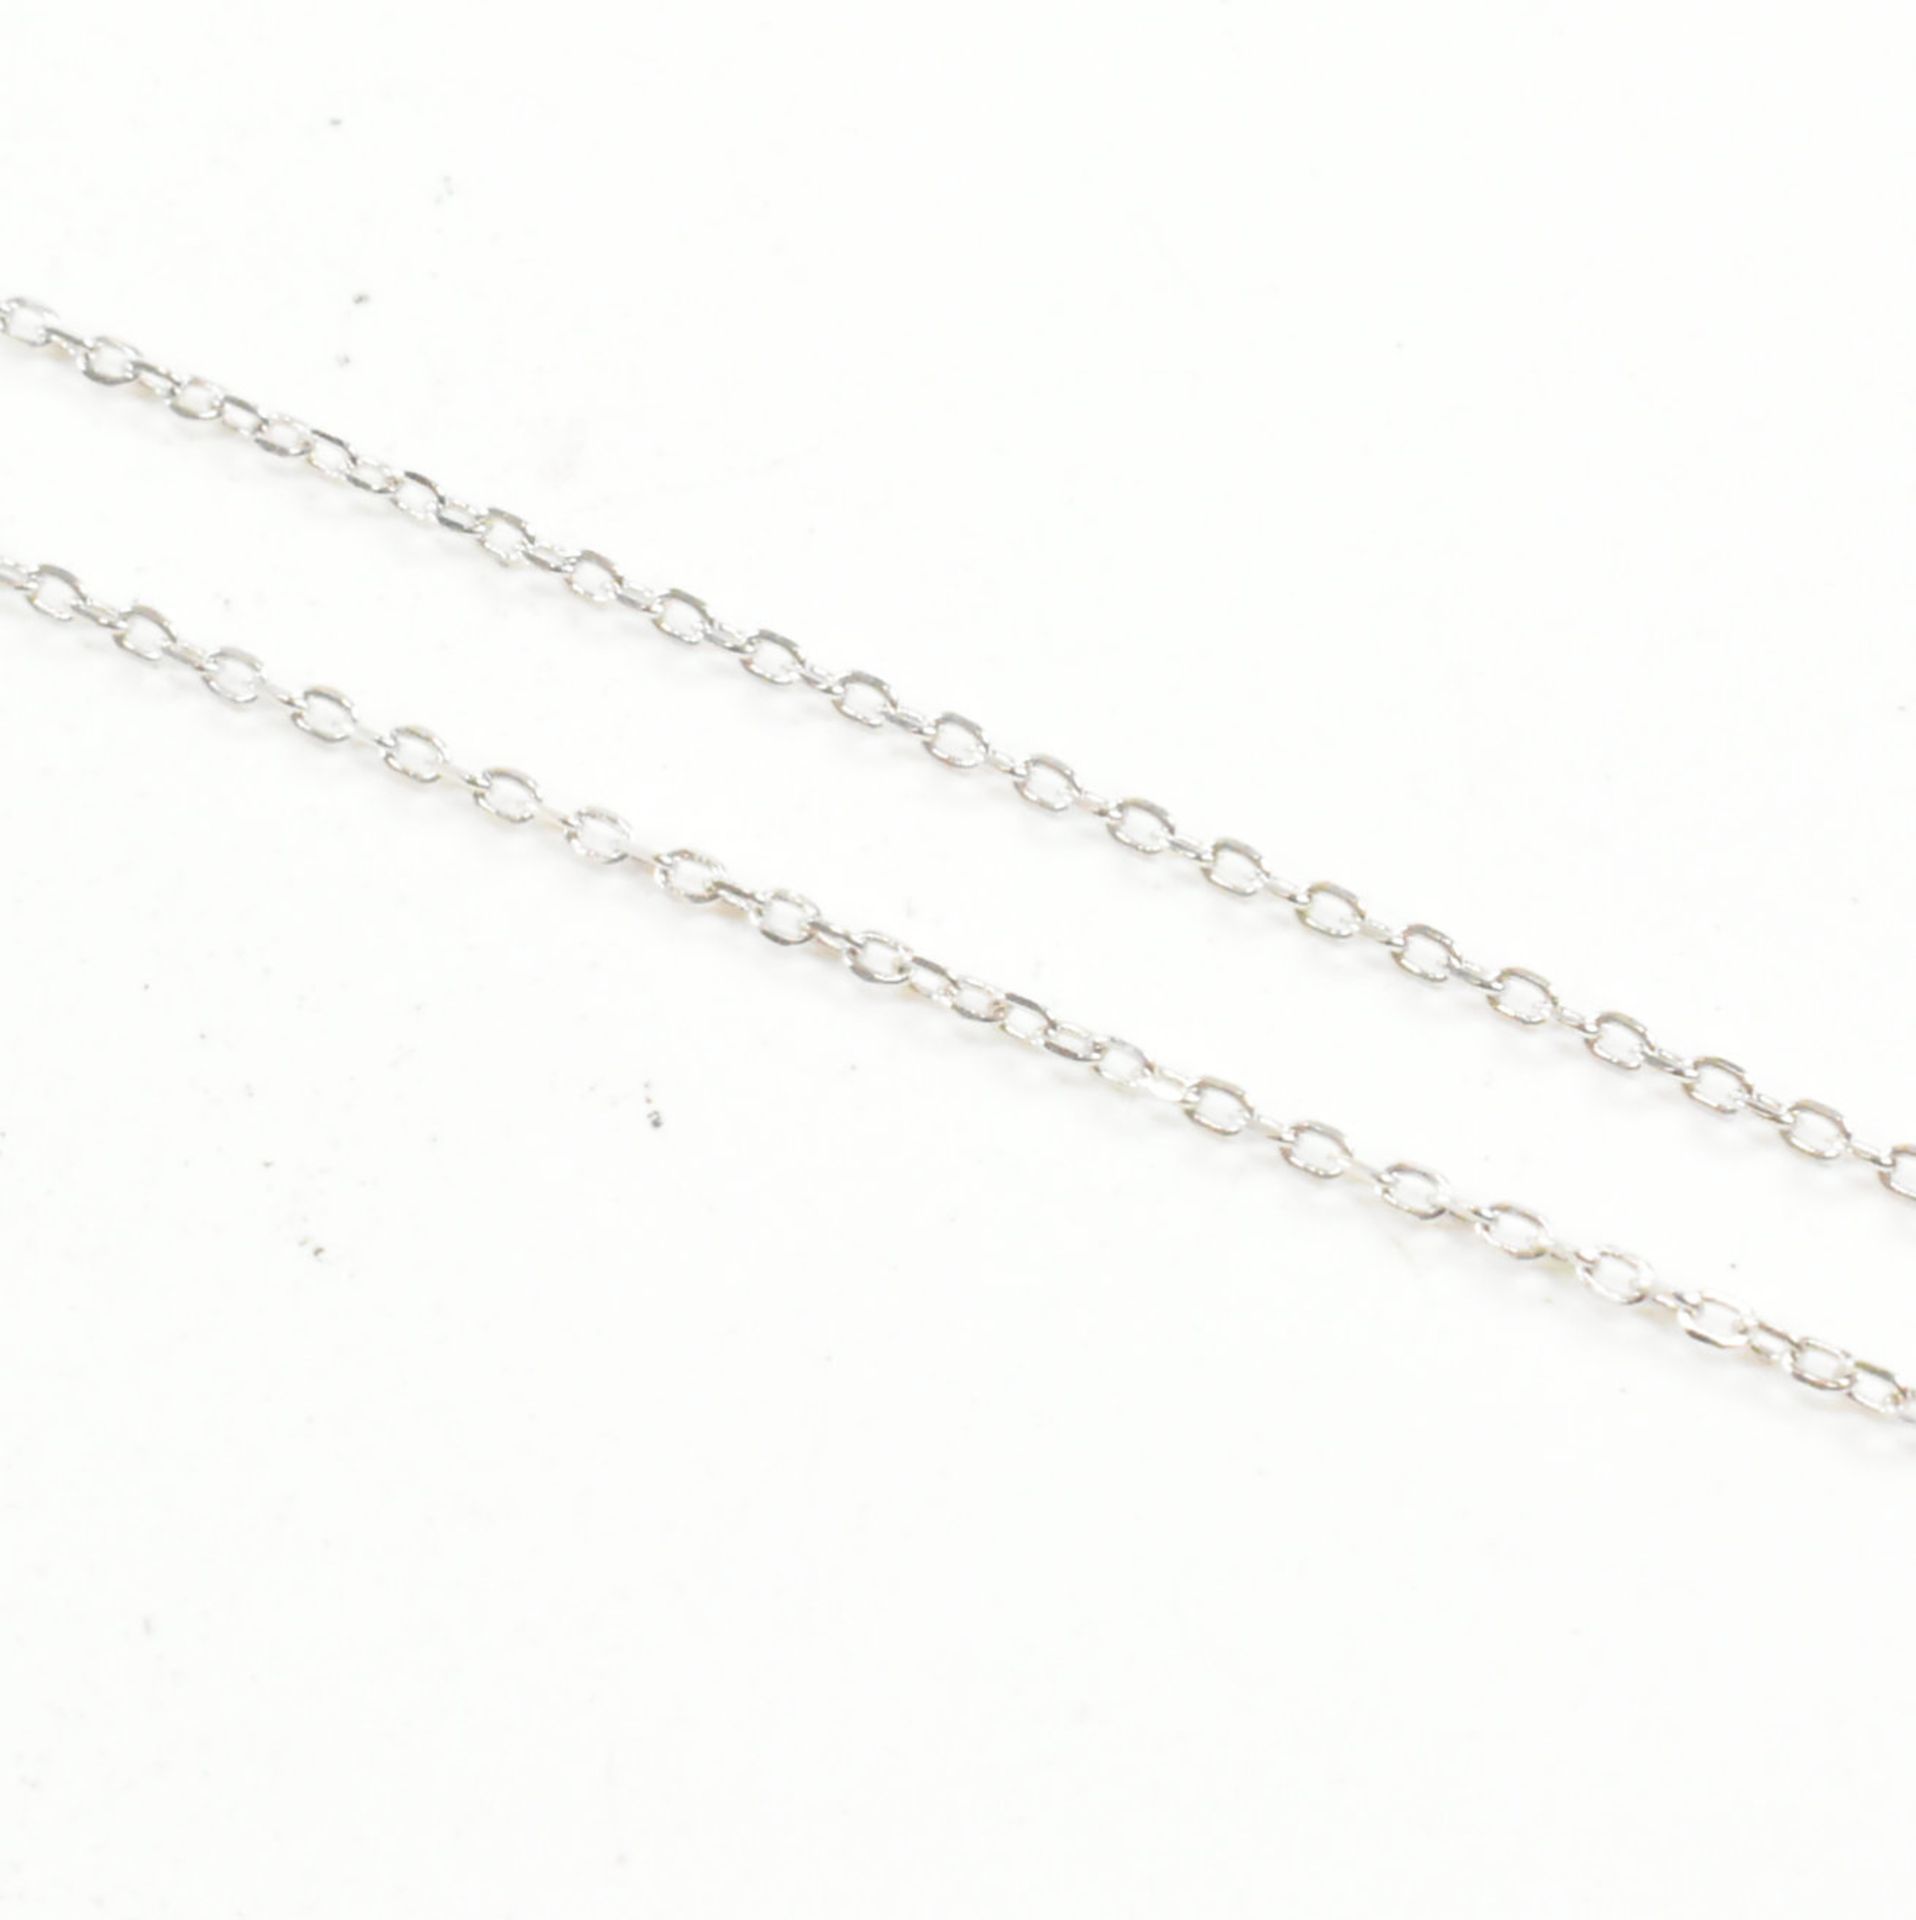 SILVER & CZ PANTHER PENDANT NECKLACE - Image 4 of 4